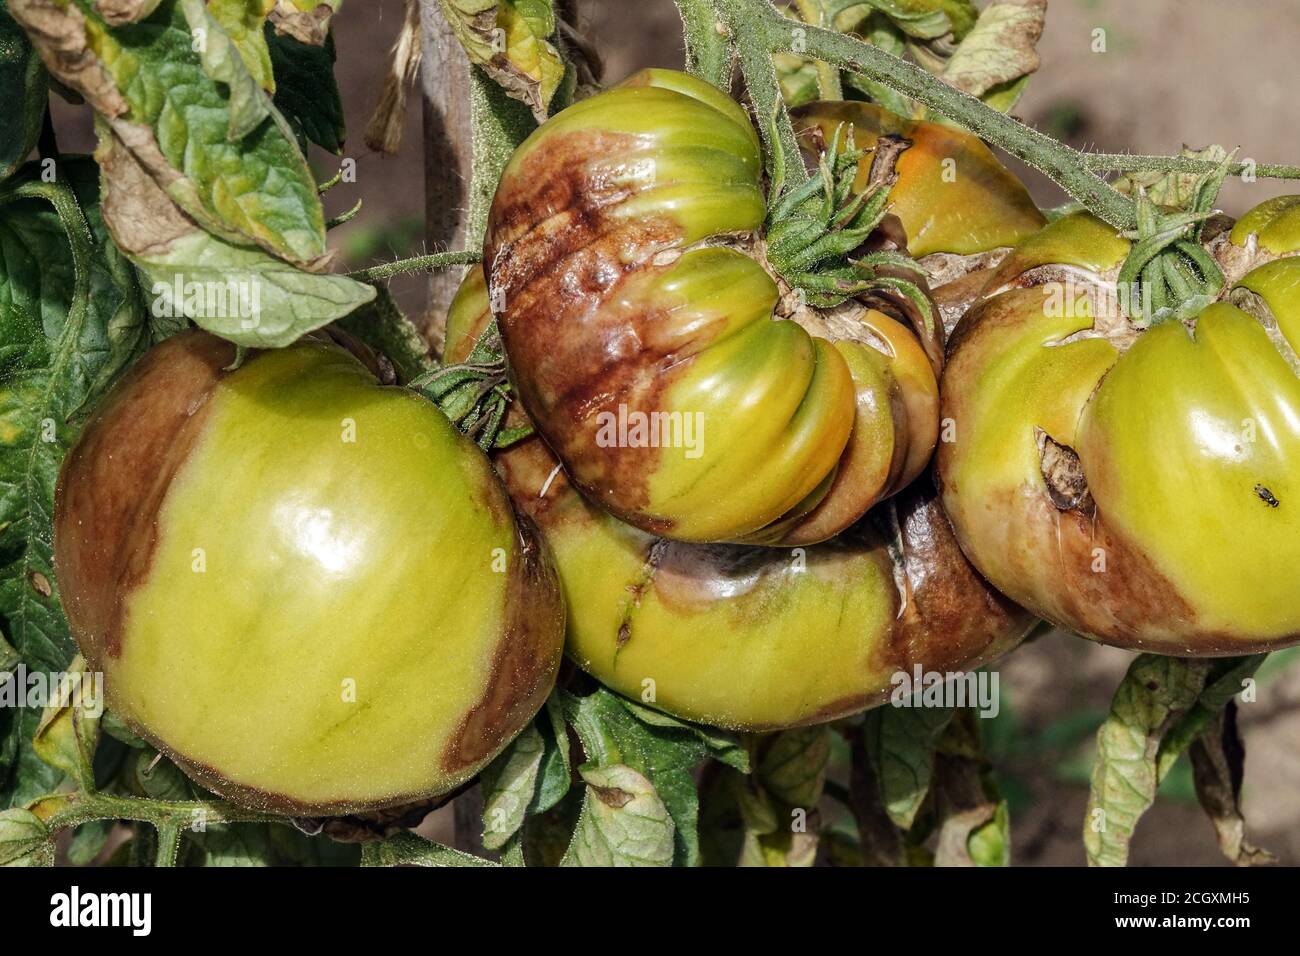 Phytophthora infestans diseases tomato blight tomatoes brown spots Stock Photo